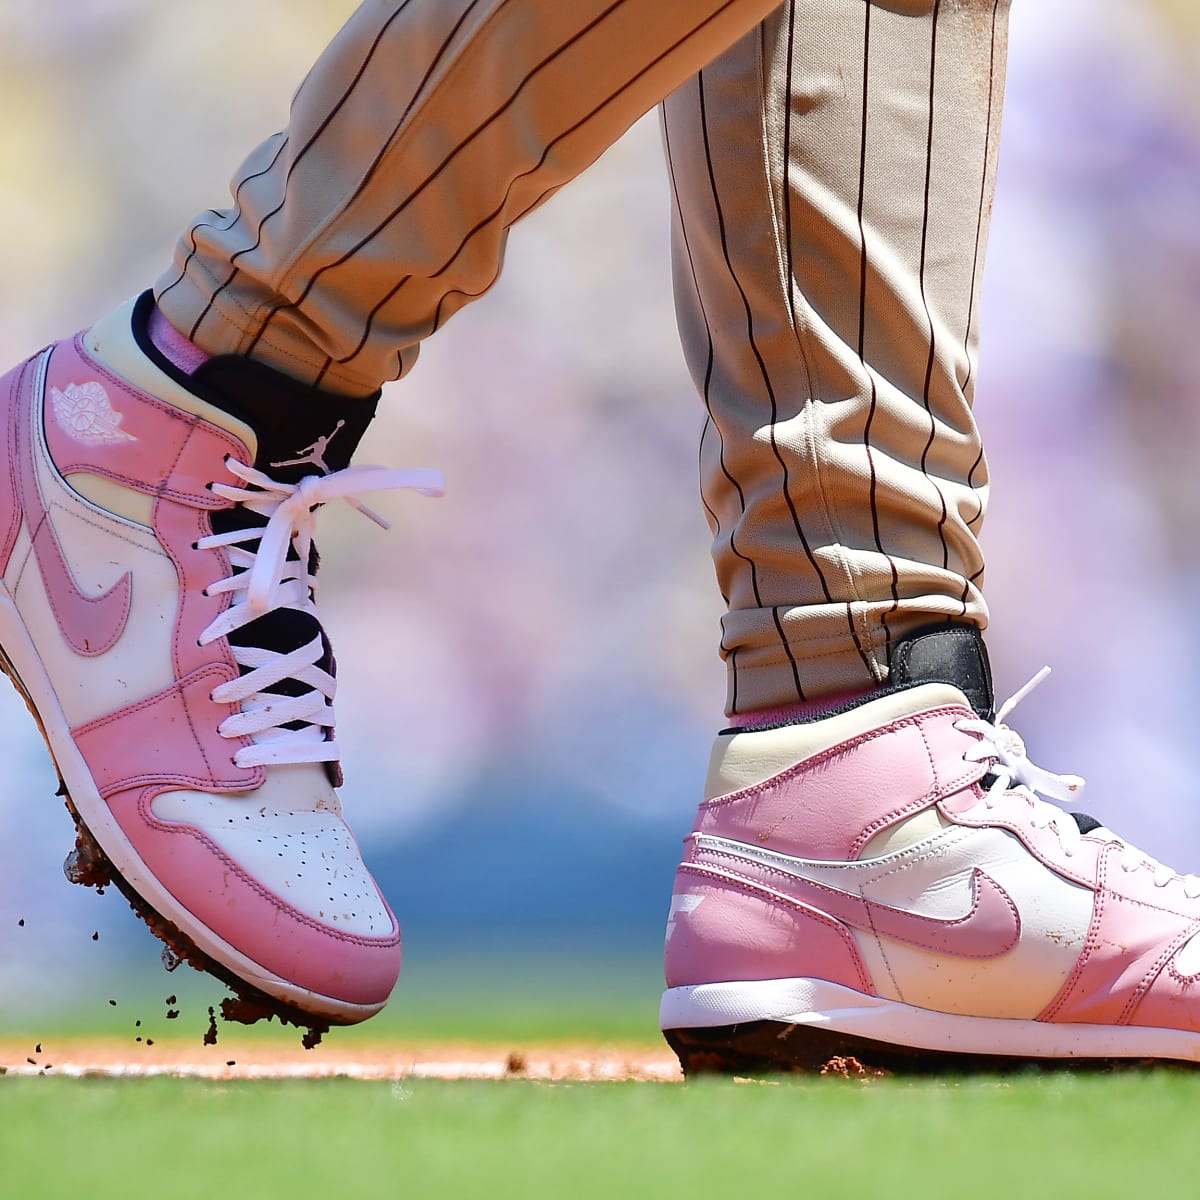 Betts' Mother's Day cleats, 05/09/2021